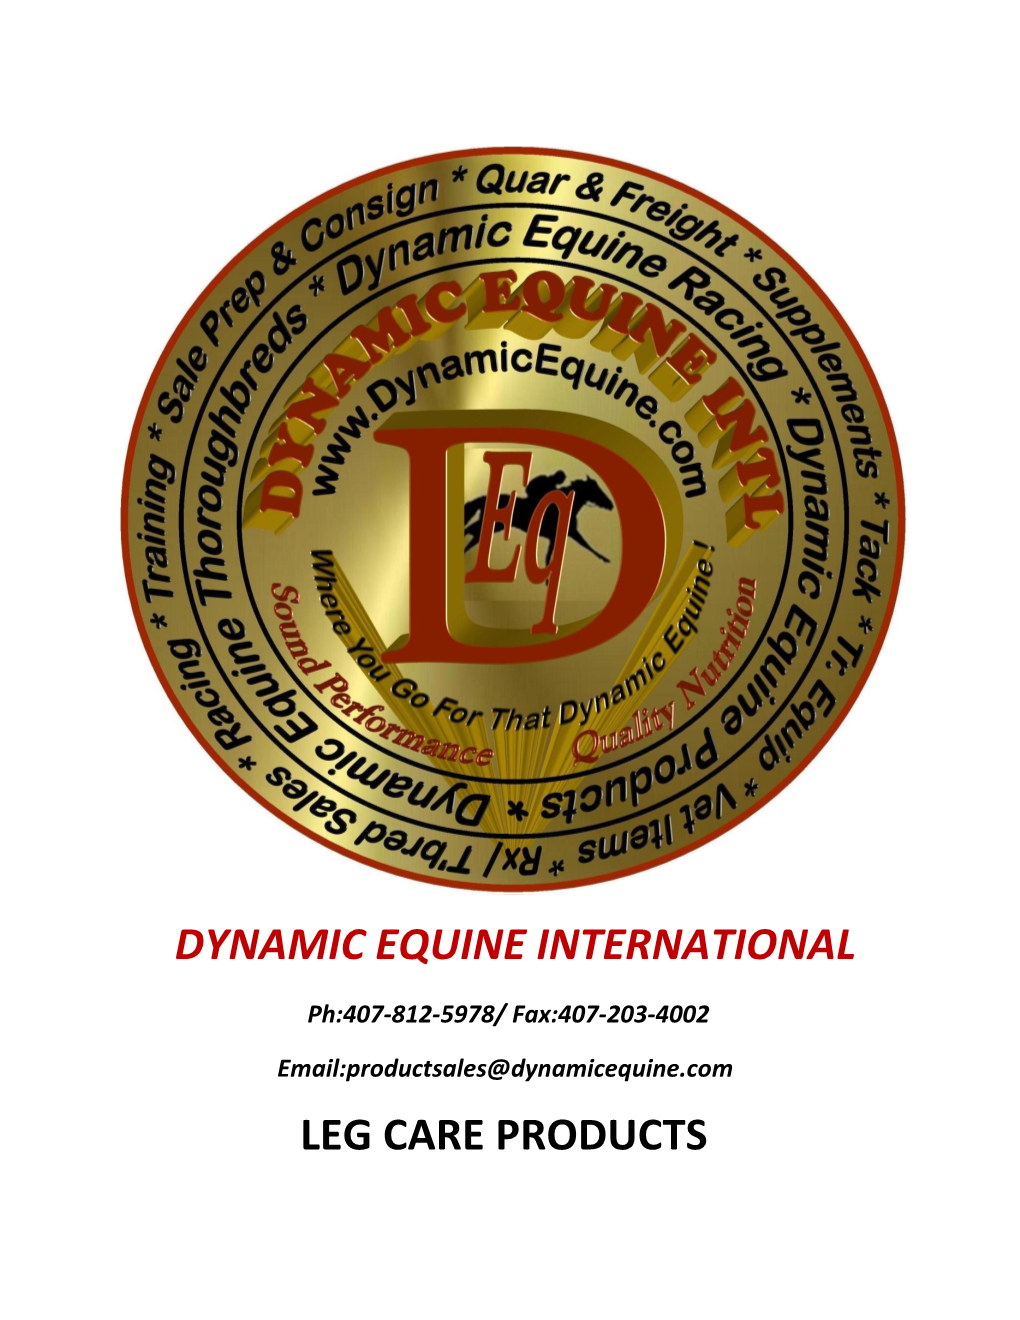 Dynamic Equine International Leg Care Products